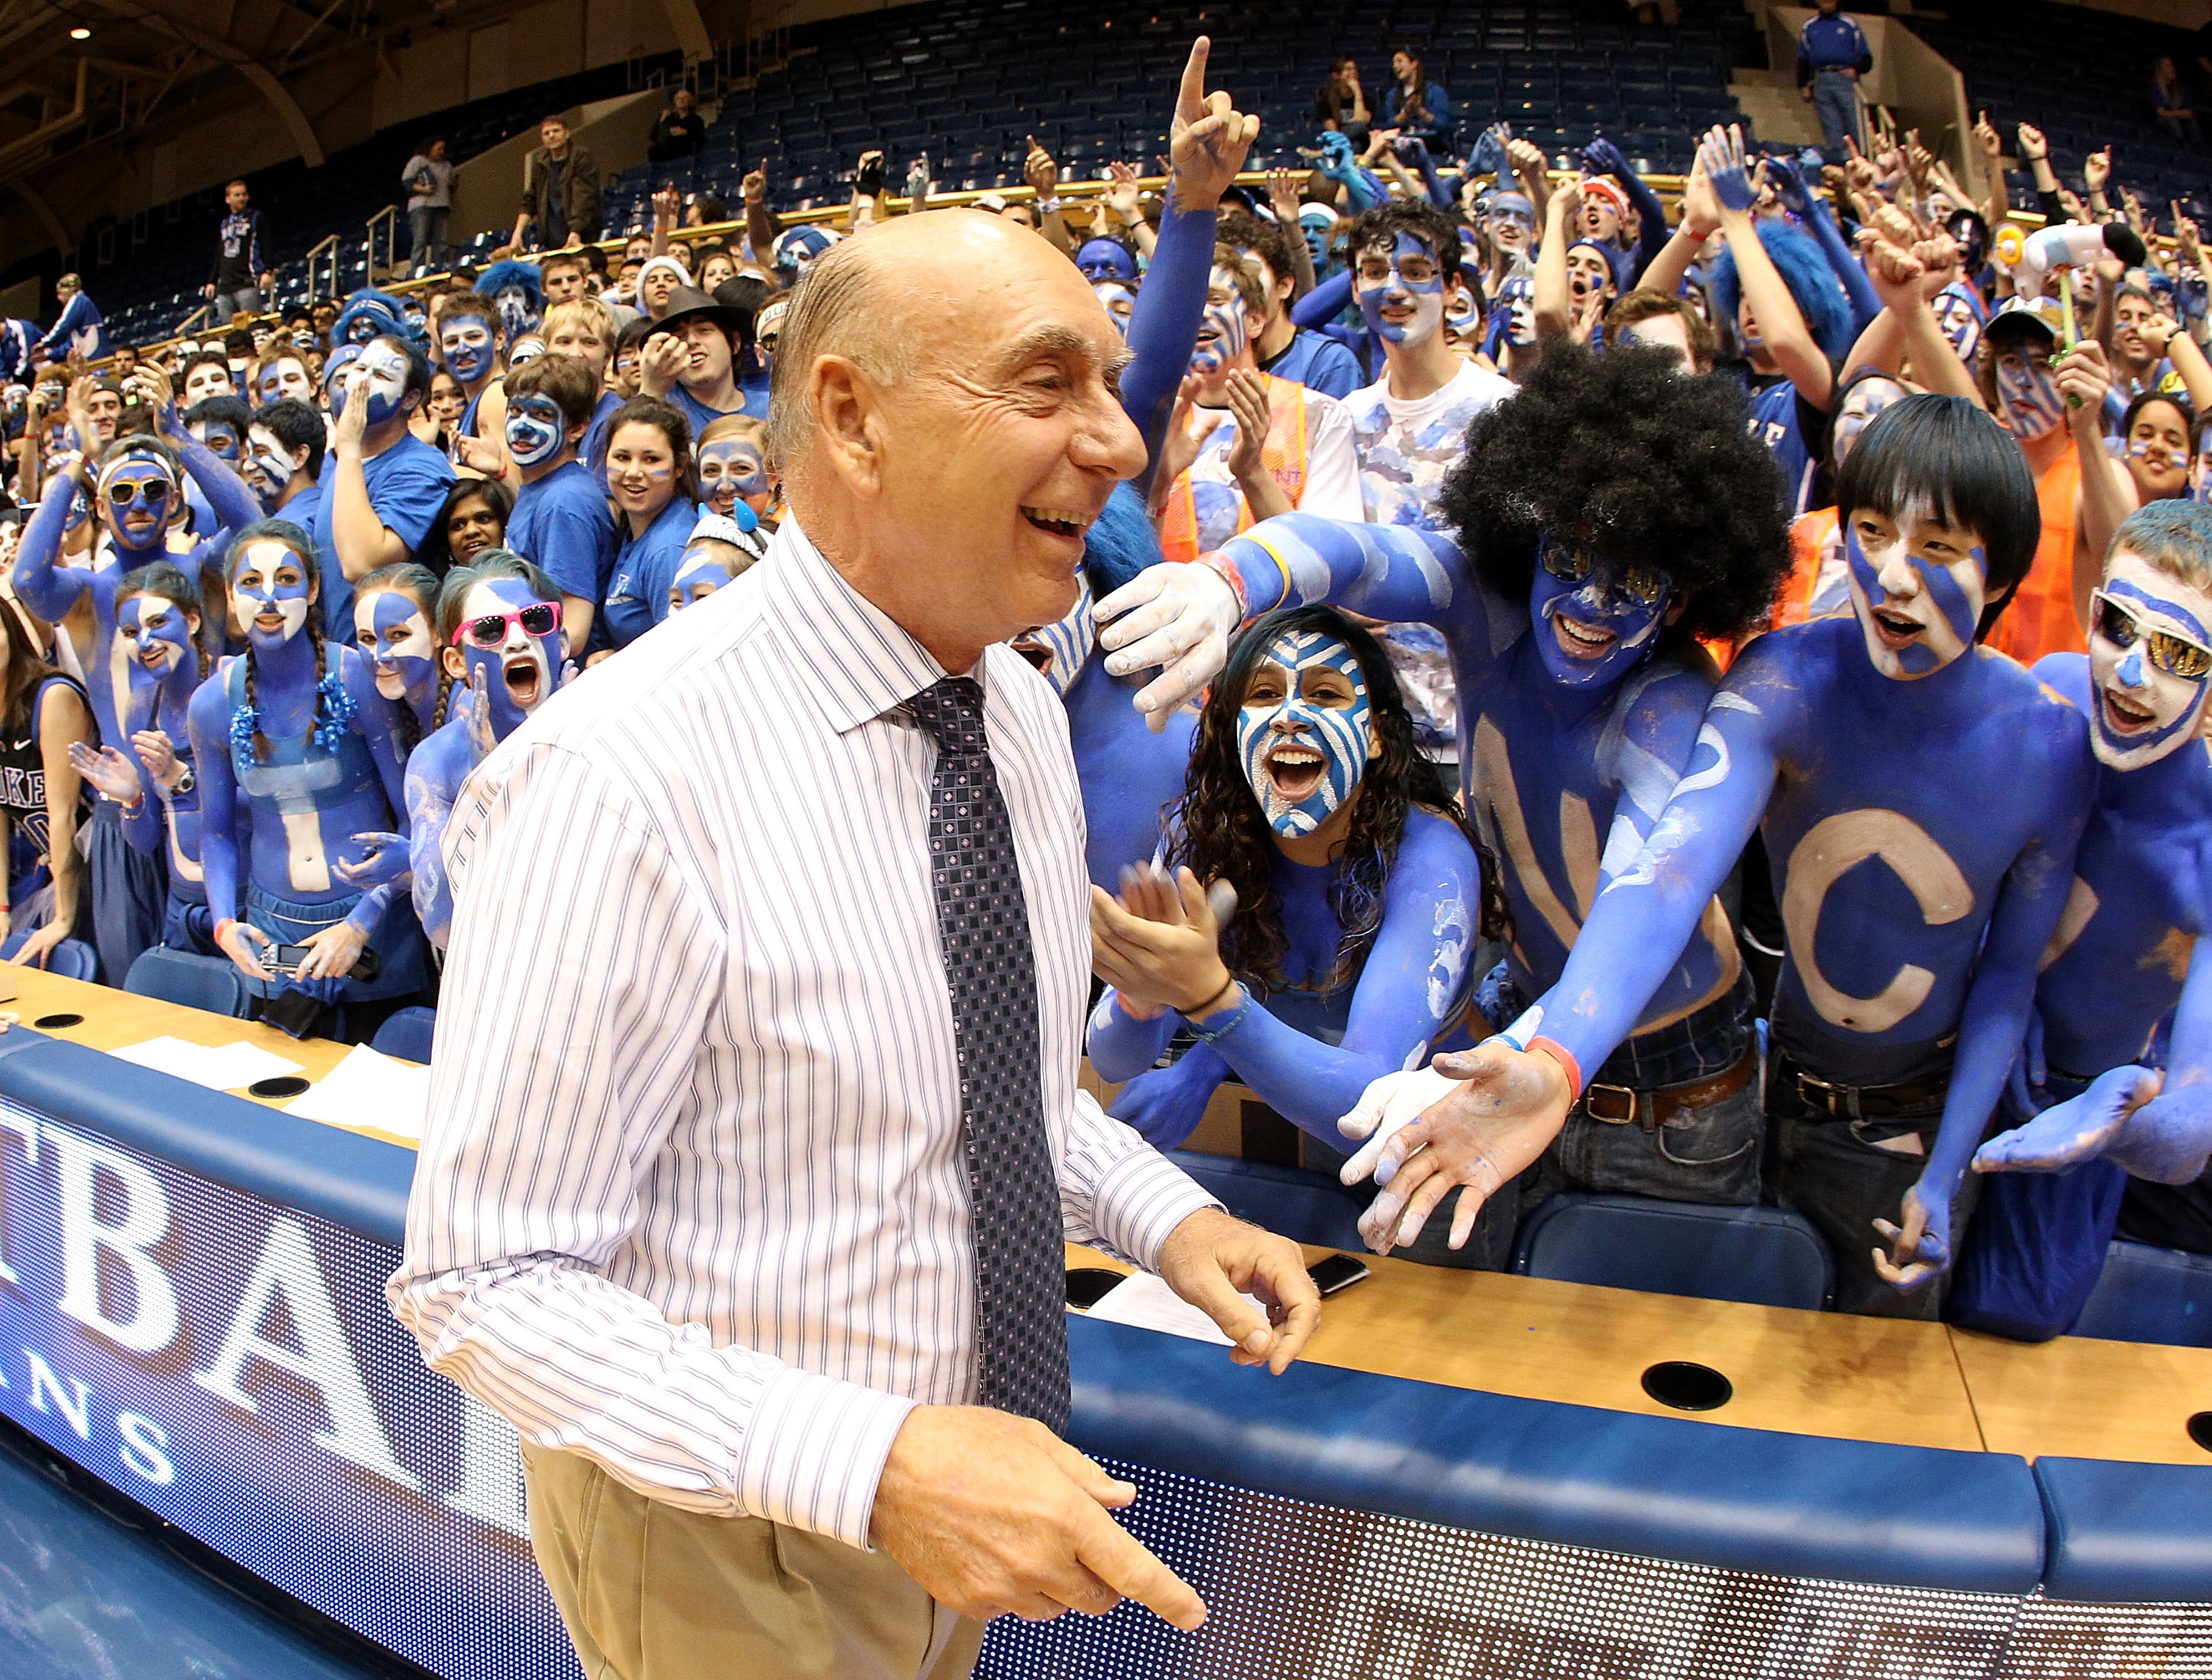 DURHAM, NC - MARCH 06:  ESPN analyst Dick Vitale celebrates with the Cameron Crazies before the start of the game between the North Carolina Tar Heels and Duke Blue Devils at Cameron Indoor Stadium on March 6, 2010 in Durham, North Carolina.  (Photo by St